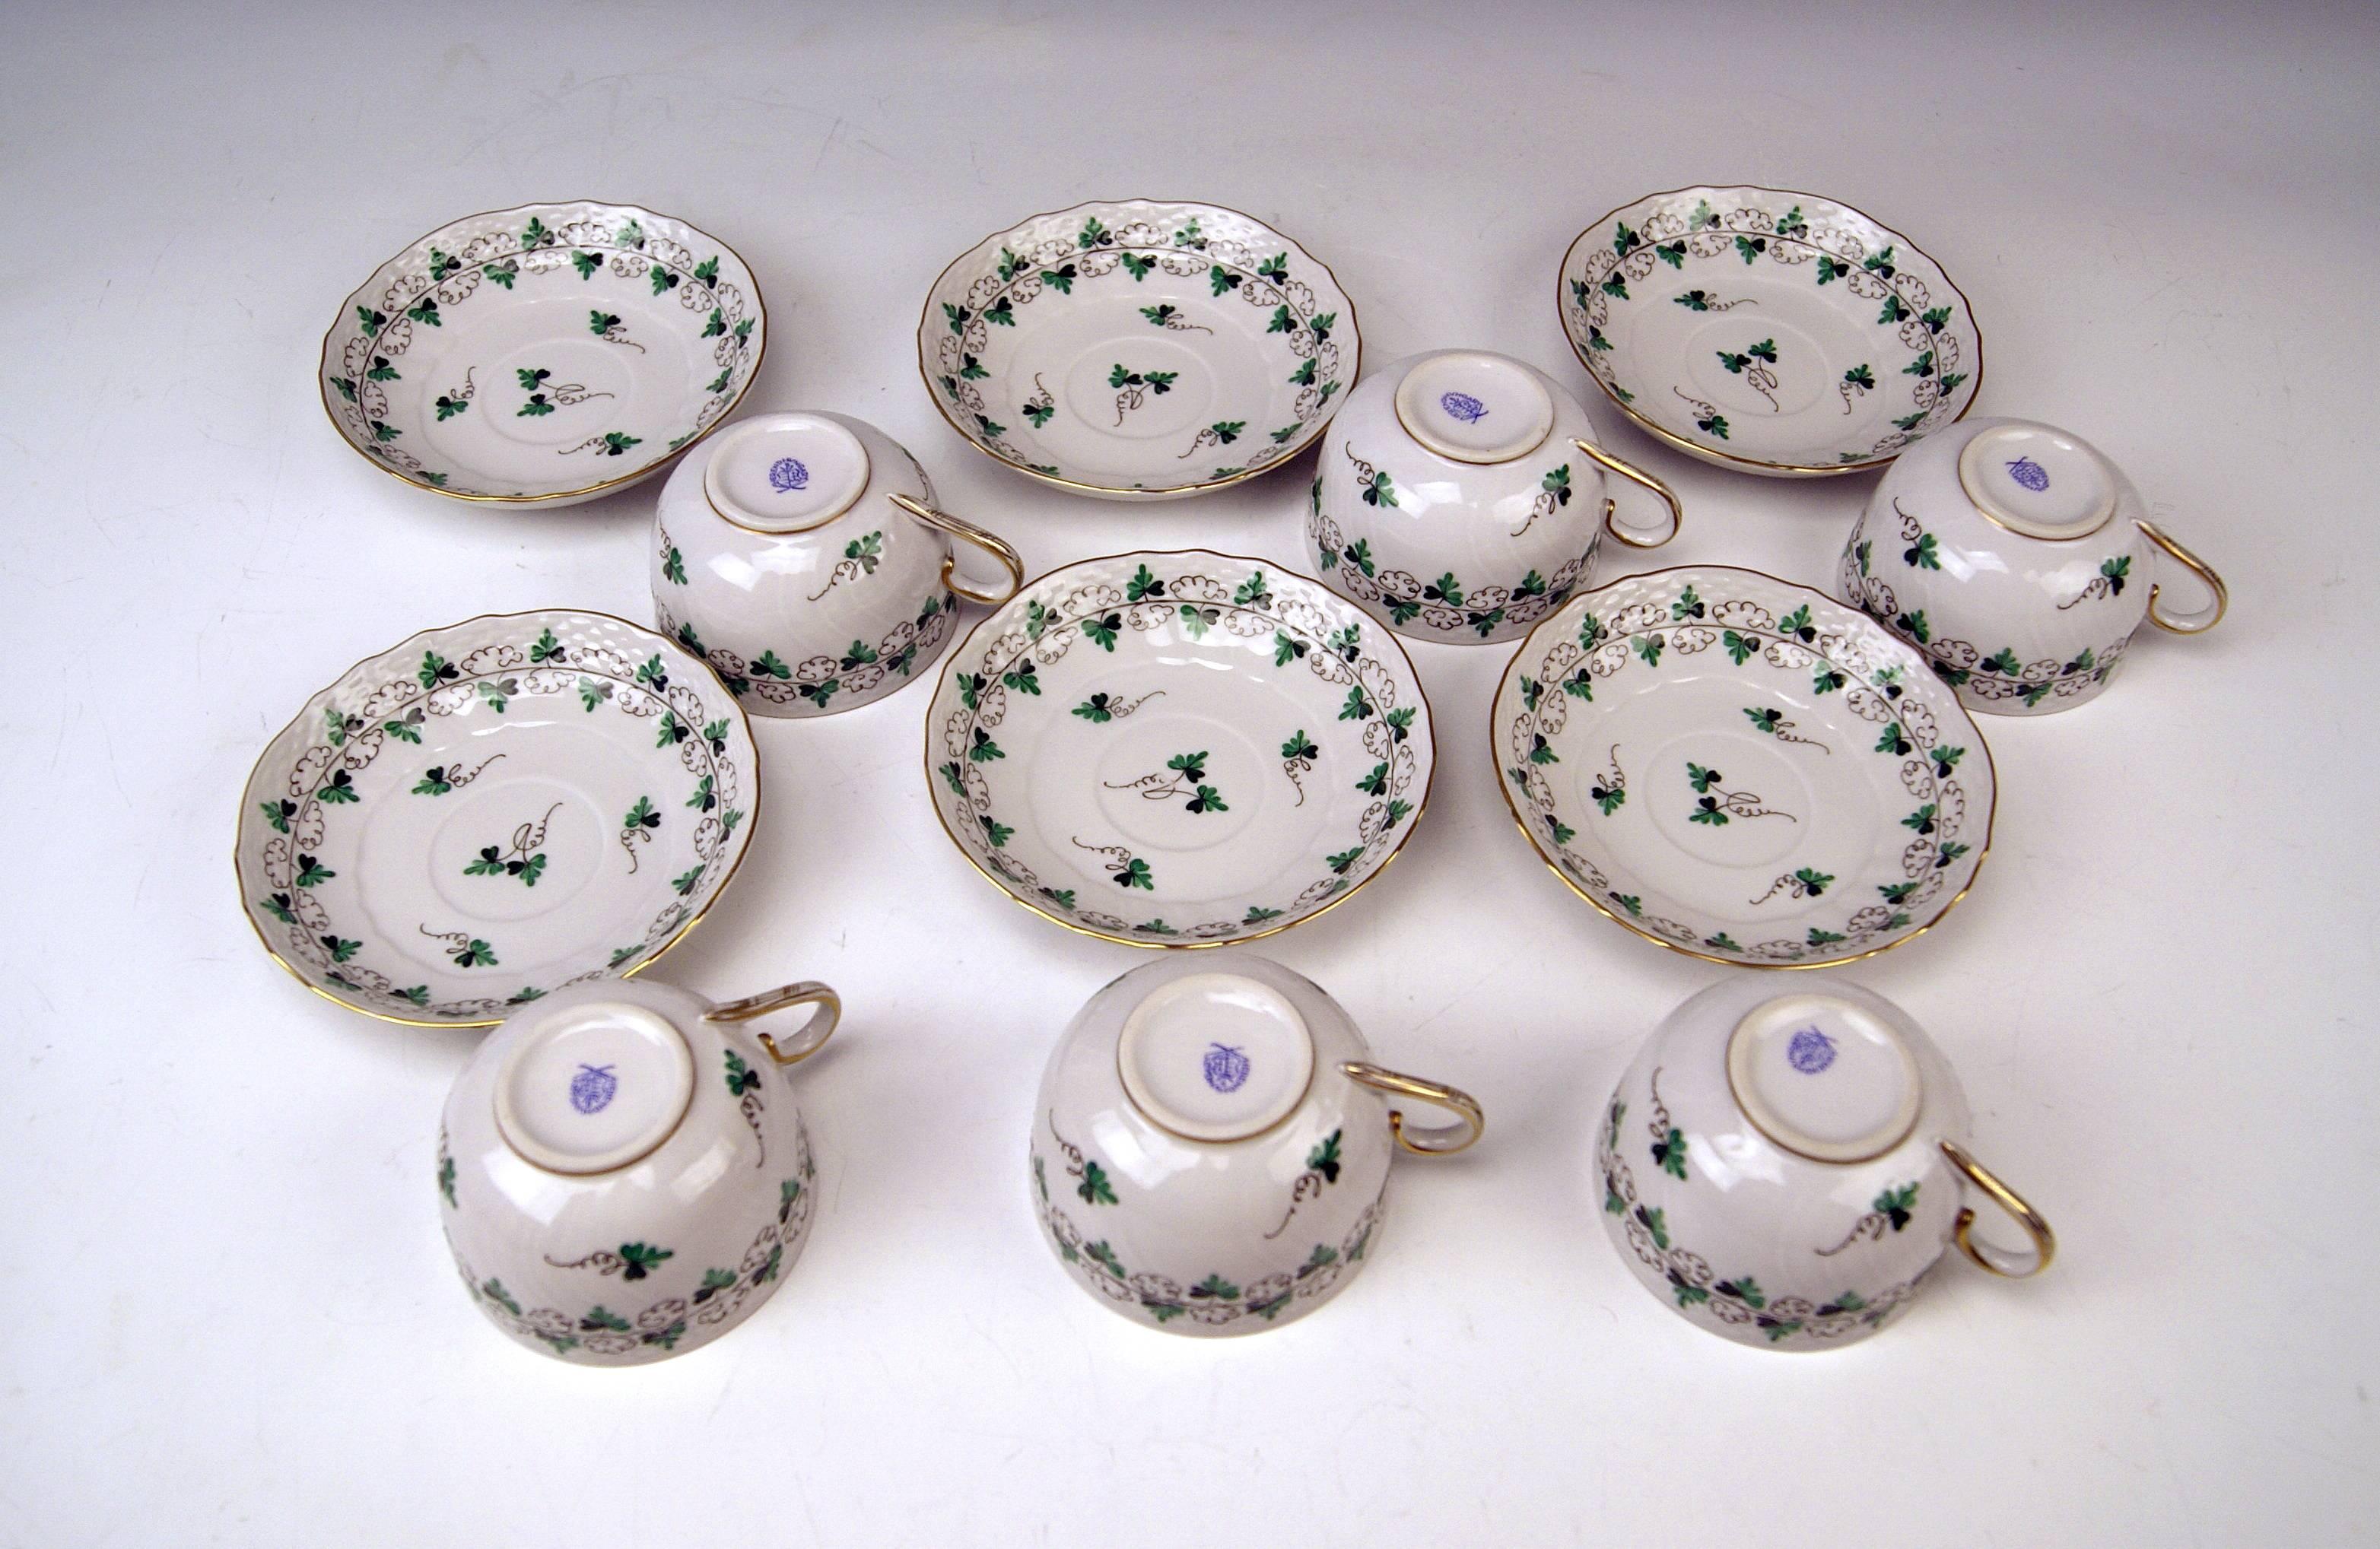 Painted Herend Tea Set for Six Persons Decor Persil, circa 1960